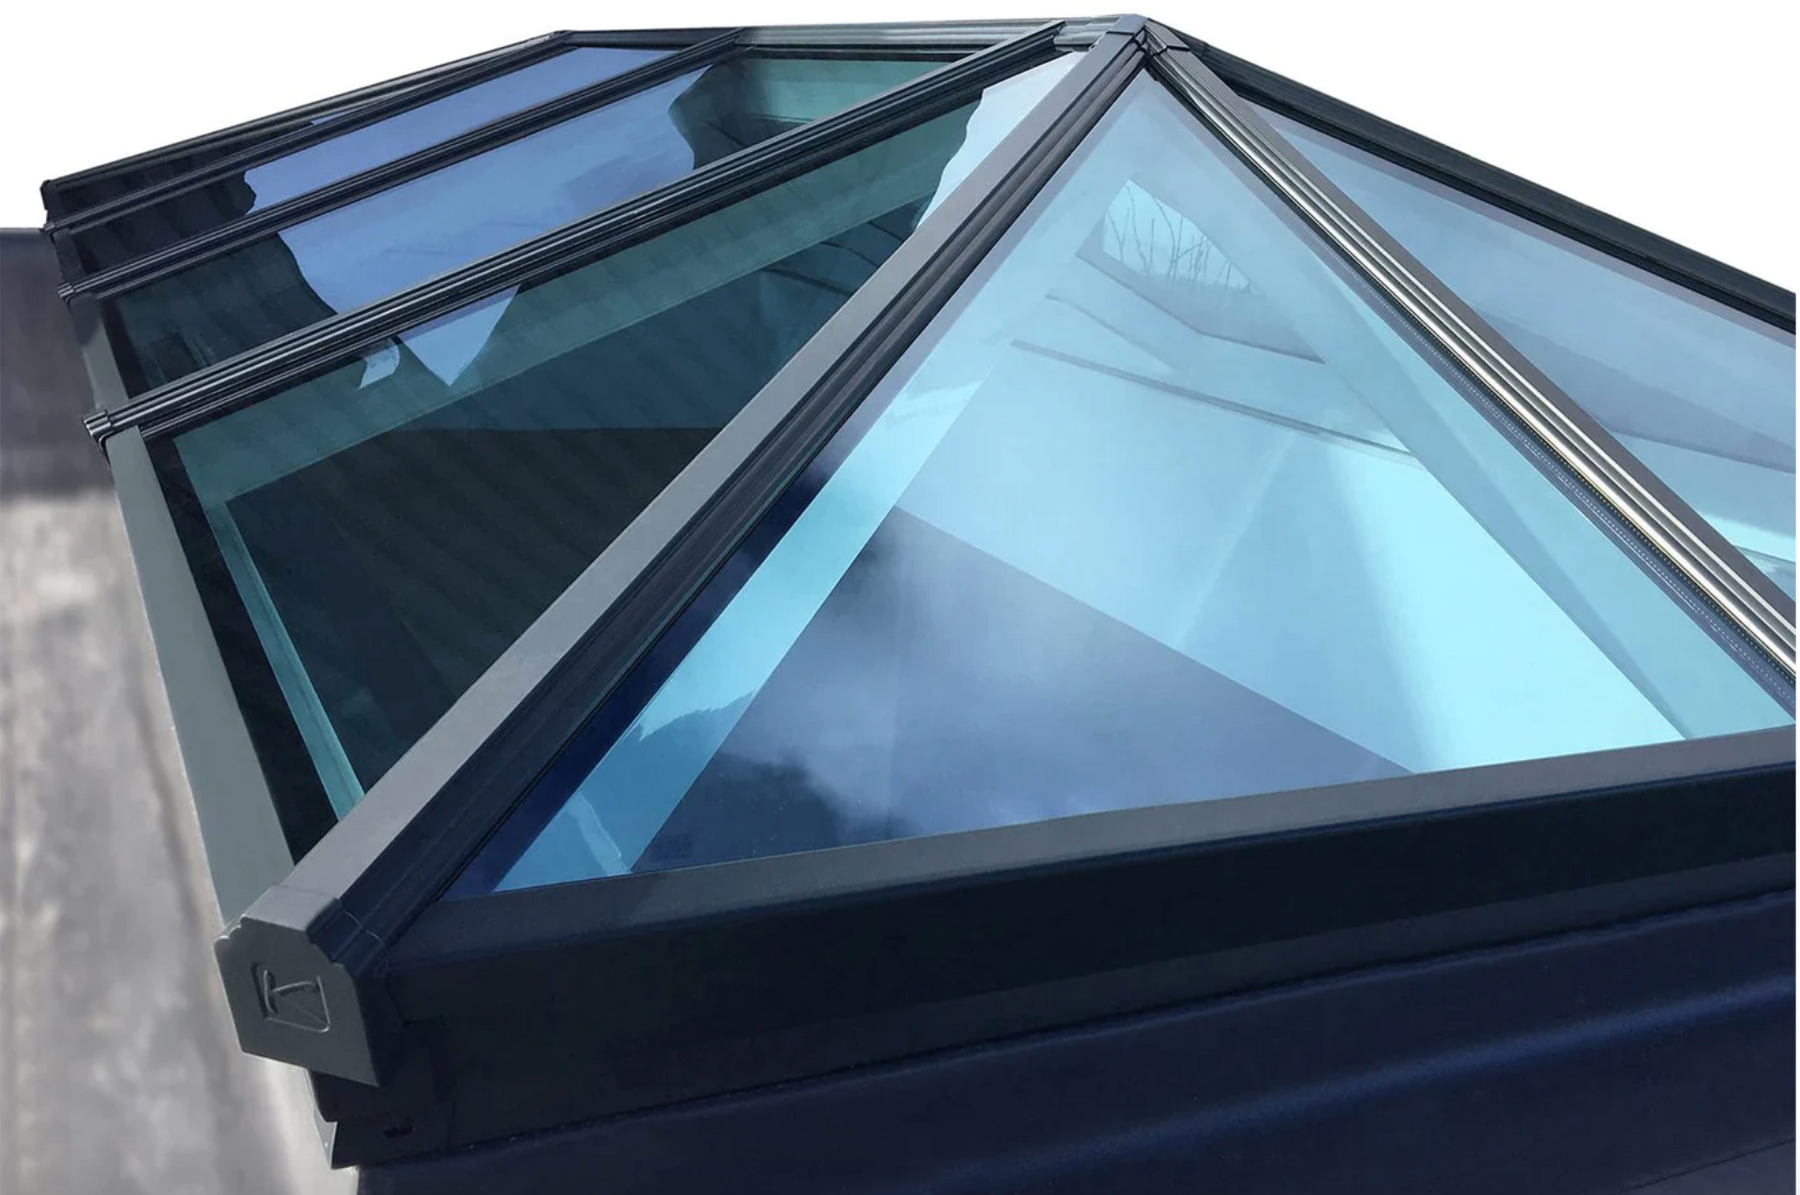 Illuminate Your Living Space: Introducing the Korniche Roof Lantern